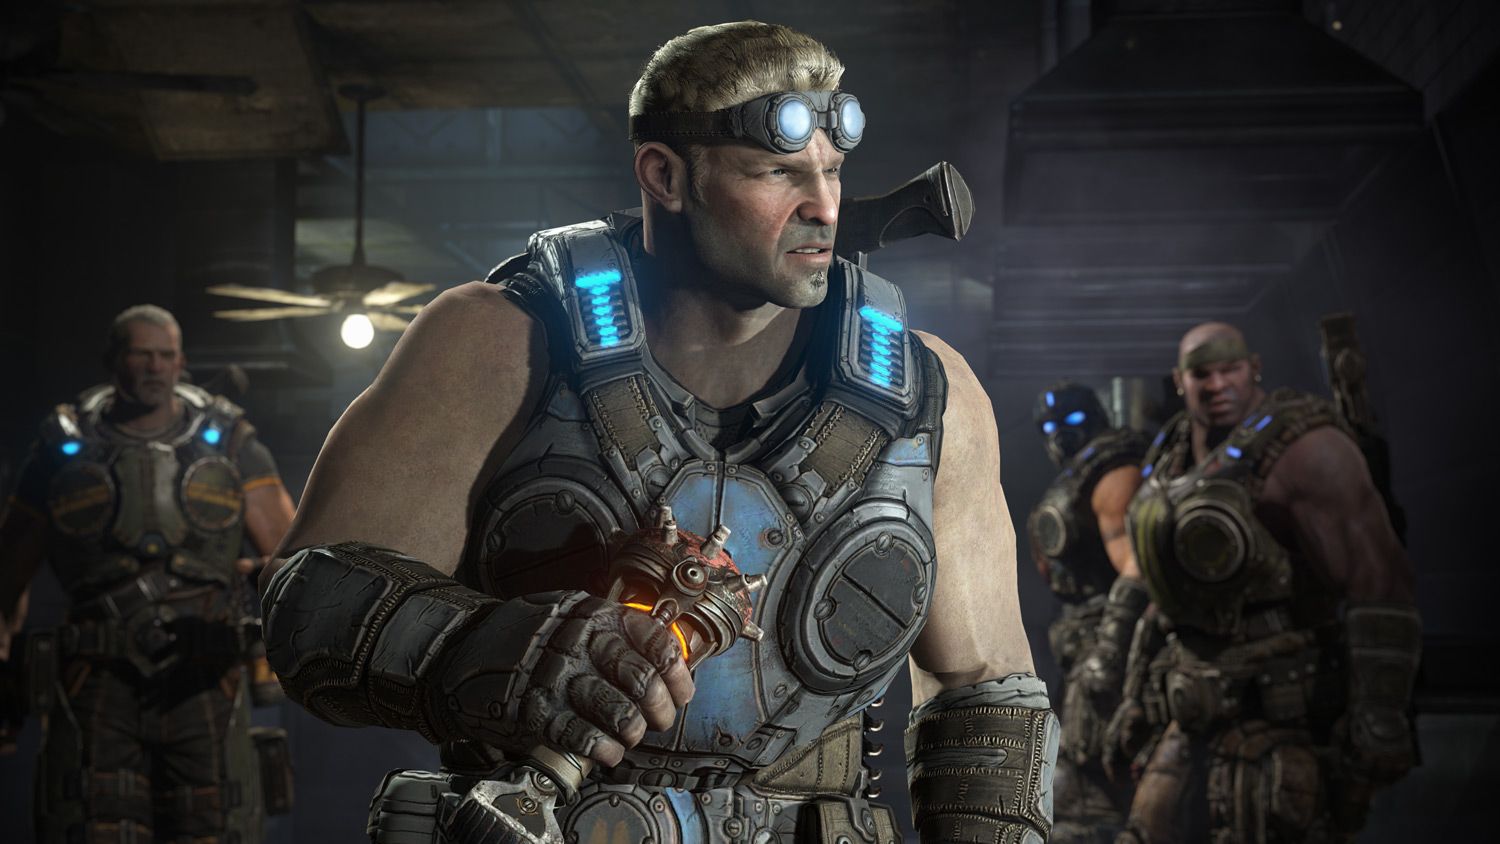 Gears of War: Judgment multiplayer is a wicked blend of Horde and Beast -  Polygon